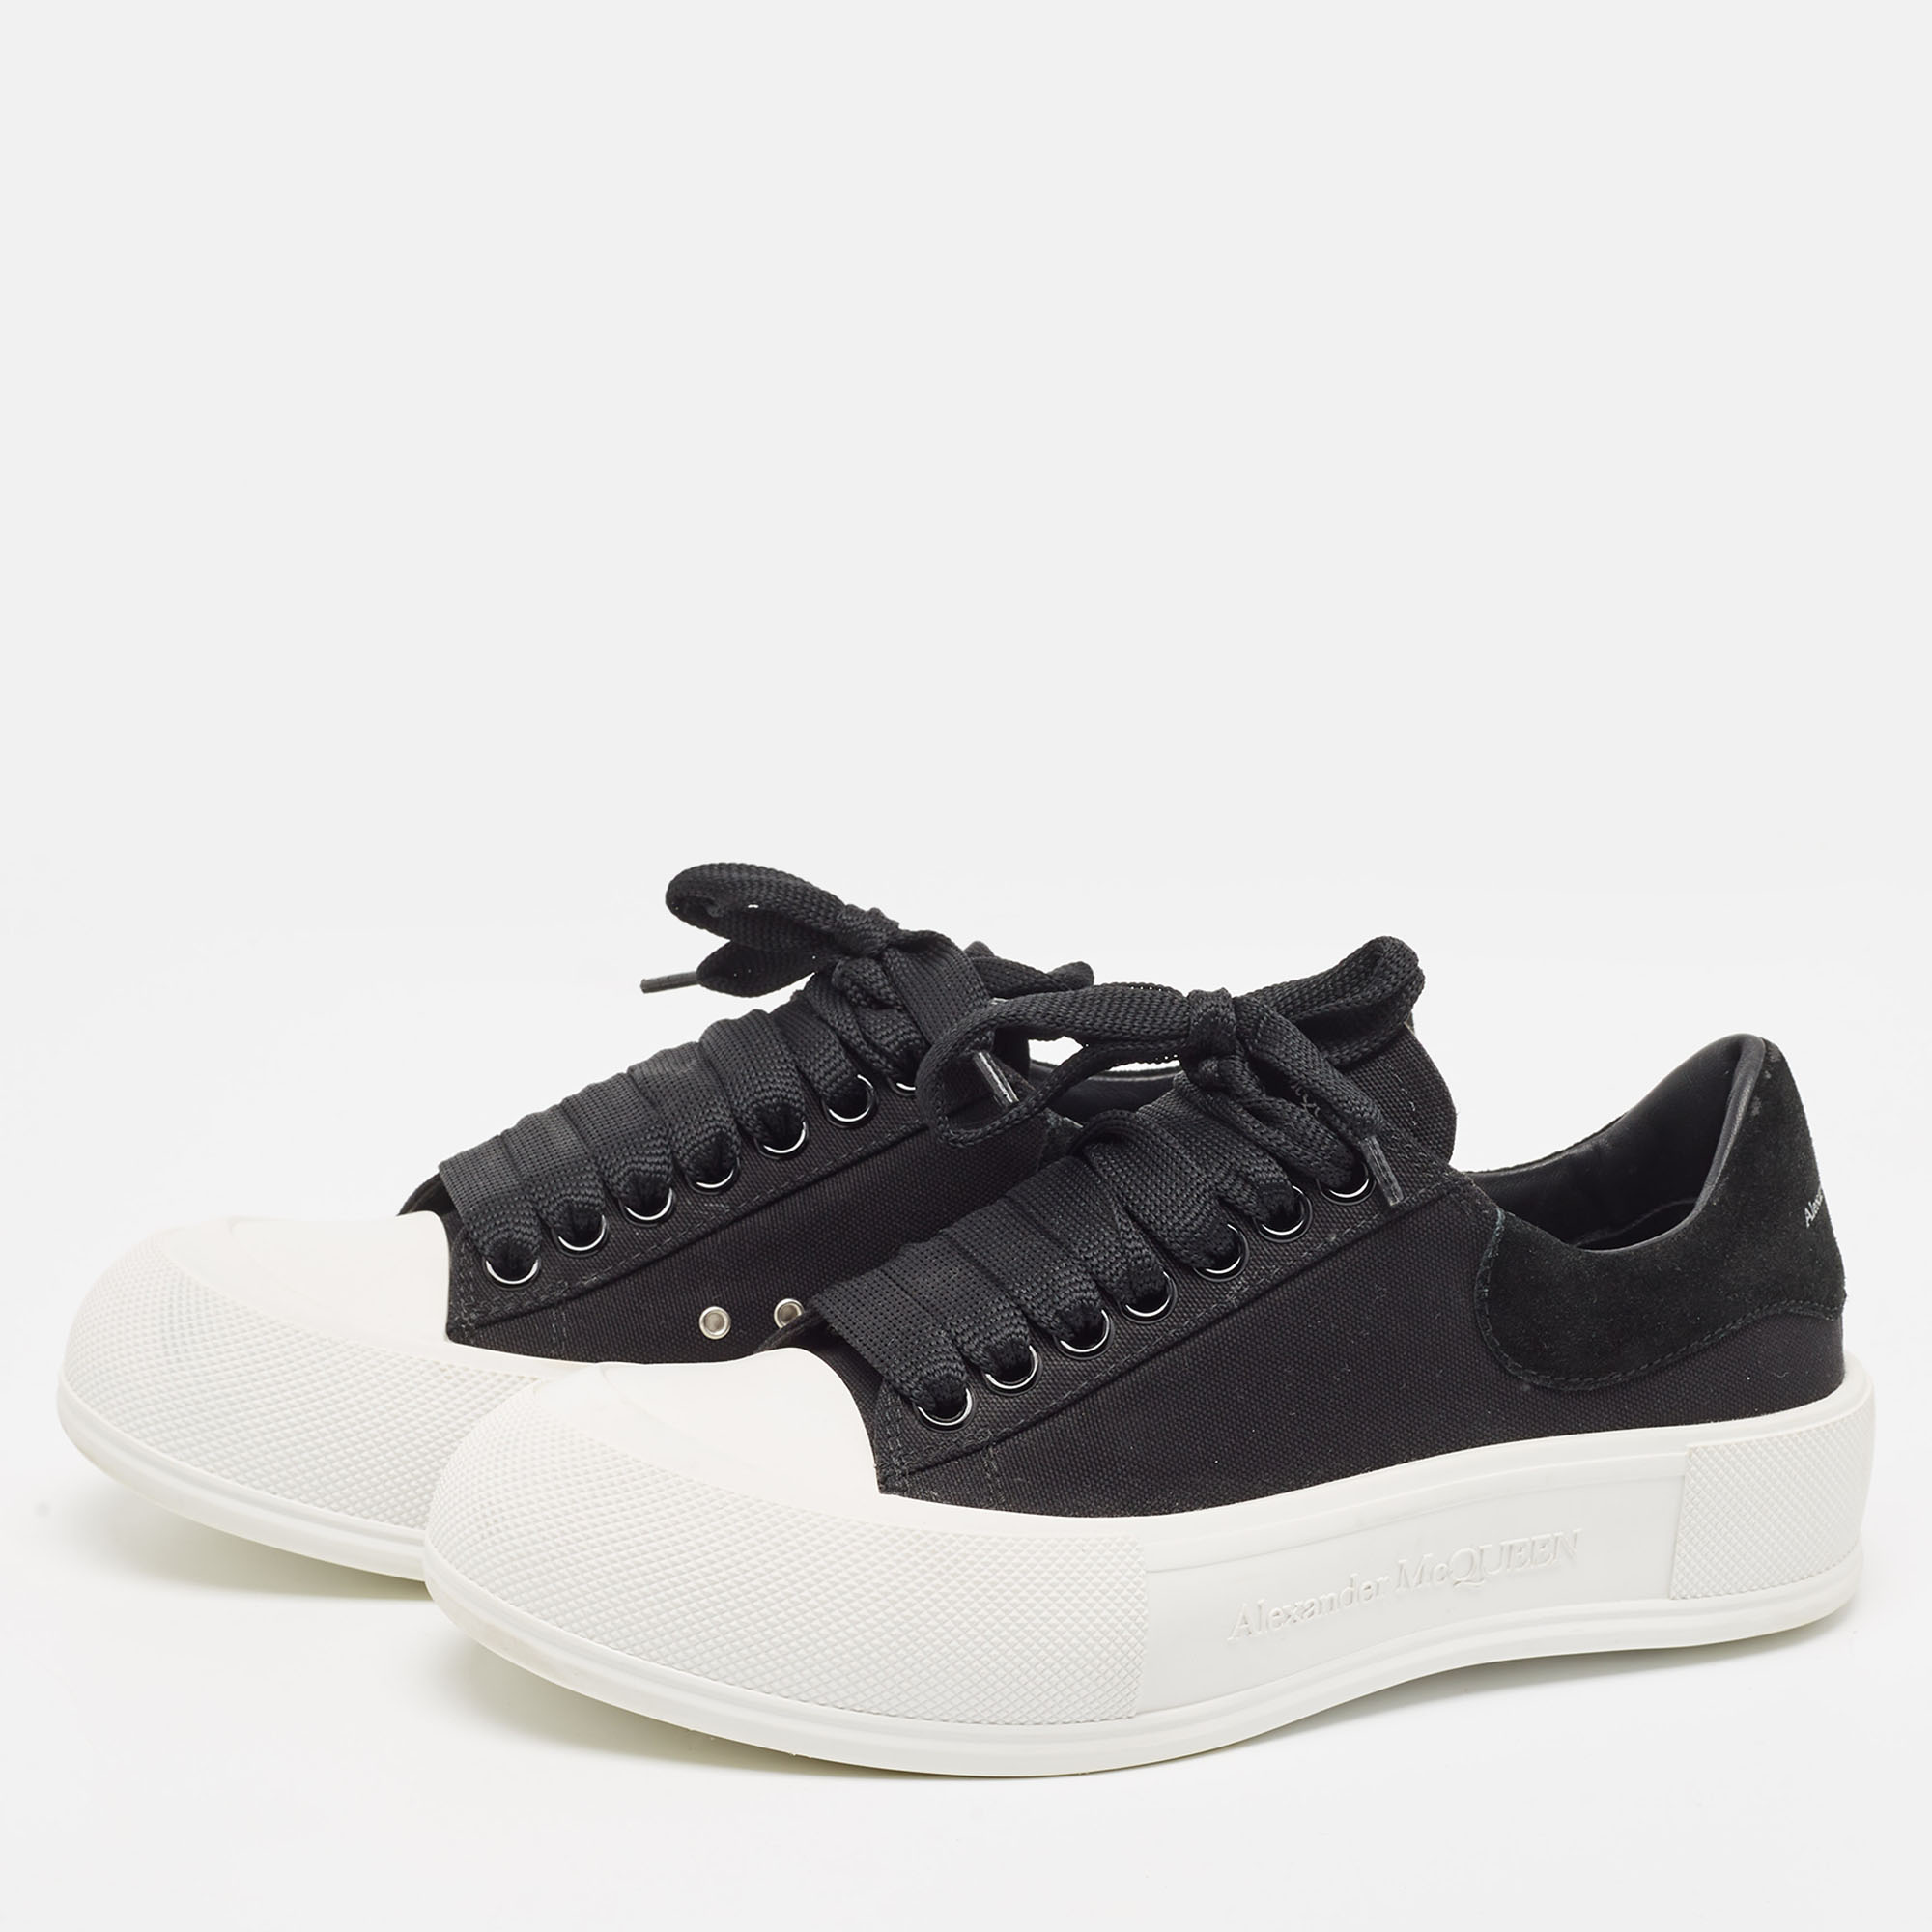 

Alexander McQueen Black/White Canvas Deck Lace Up Plimsoll Sneakers Size